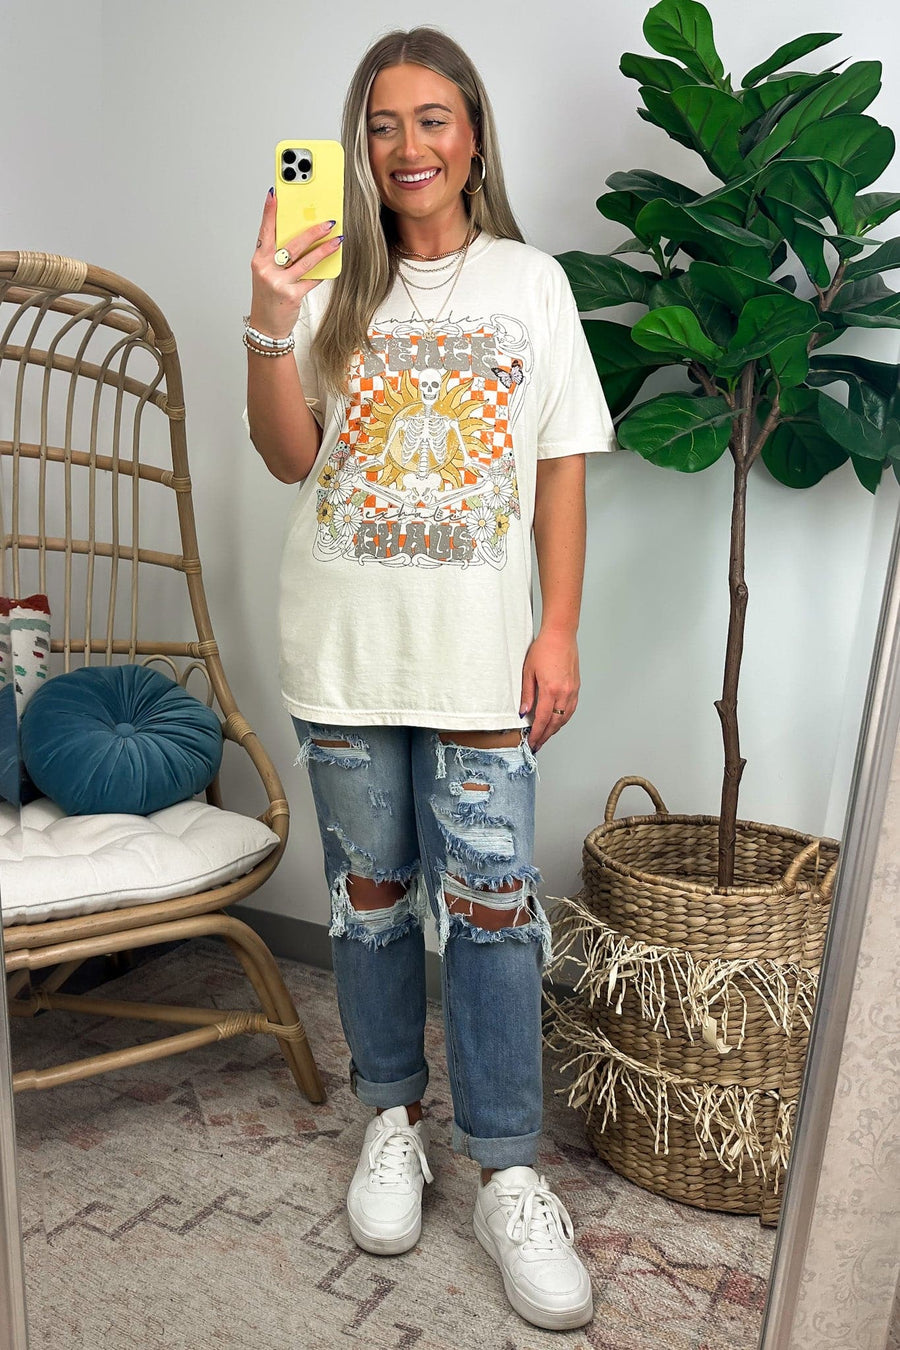  Inhale Peace Exhale Chaos Skeleton Vintage Oversized Graphic Tee - FINAL SALE - Madison and Mallory